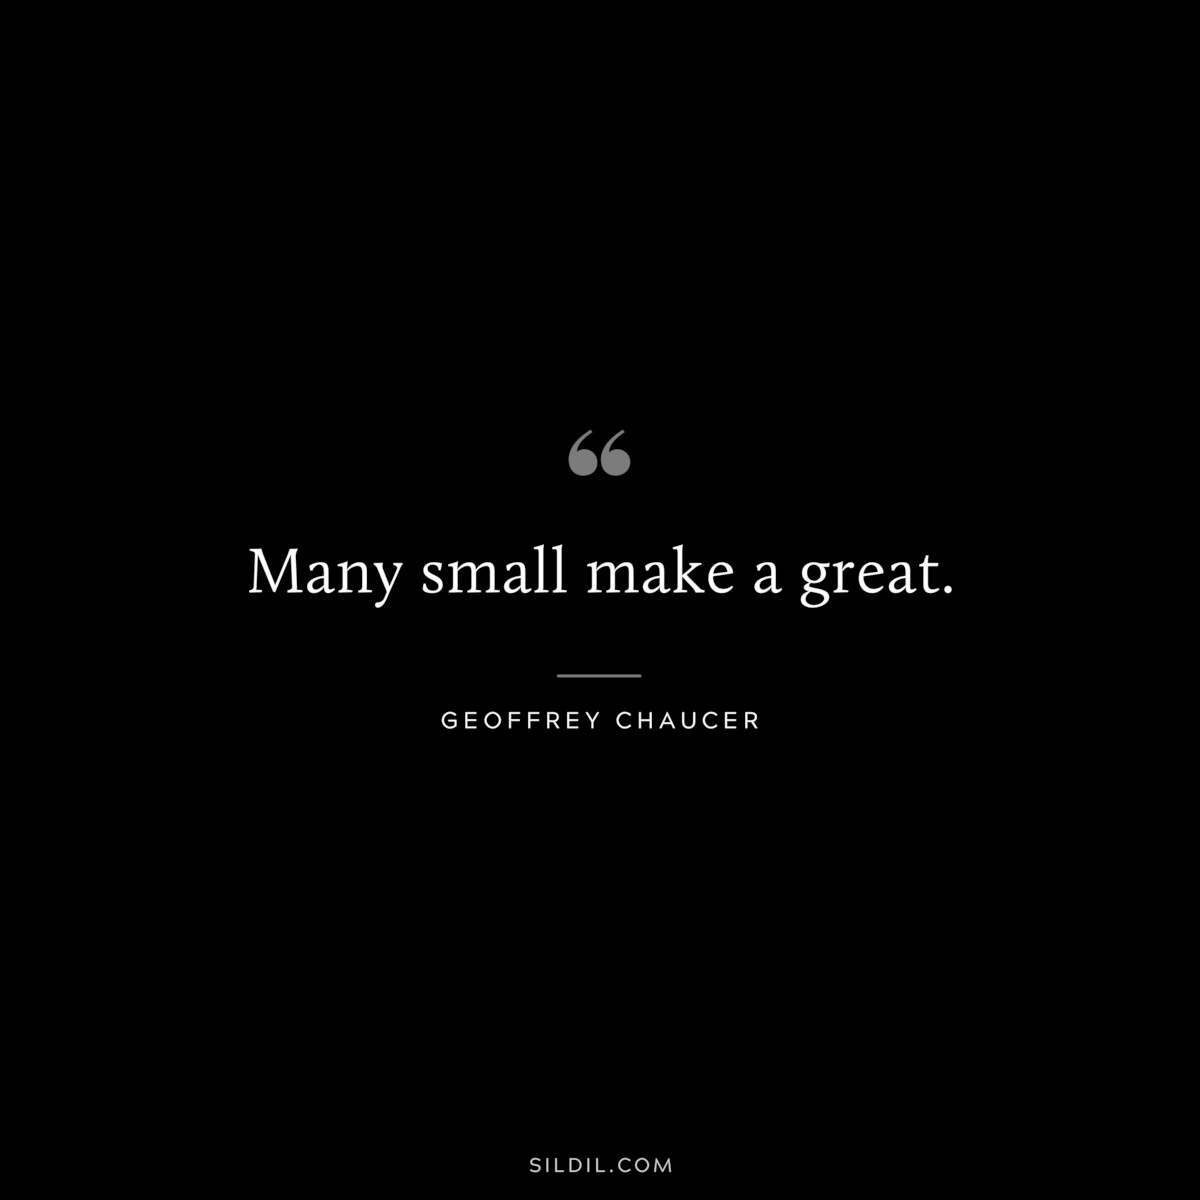 Many small make a great. ― Geoffrey Chaucer